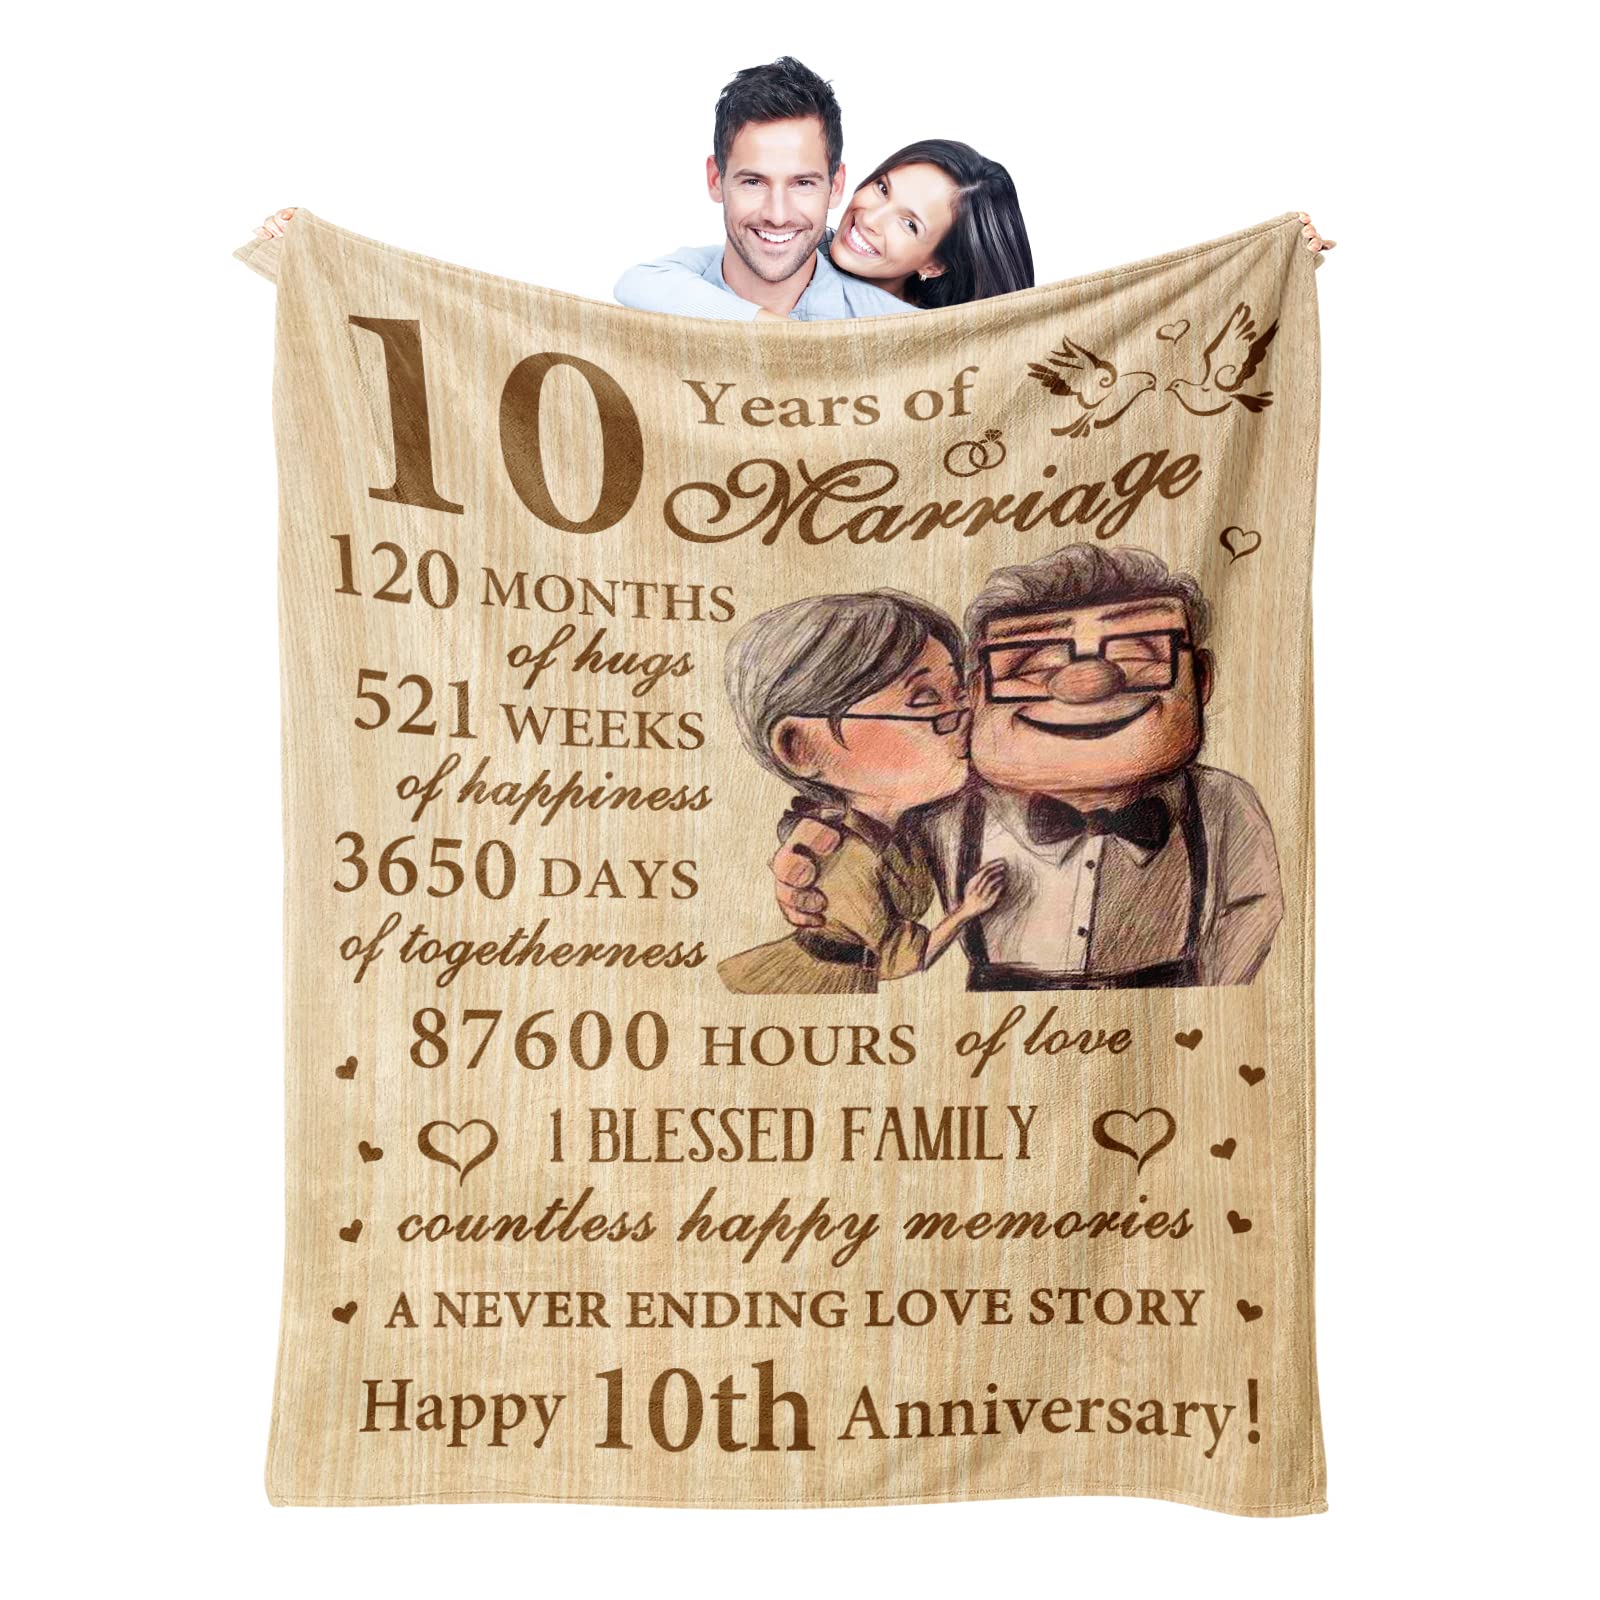 Neuturs 10th Anniversary Tin Gifts Blanket, 10 Year Anniversary Wedding Gifts for Him Her Couples,10th Anniversary Wedding Gifts, Gifts 